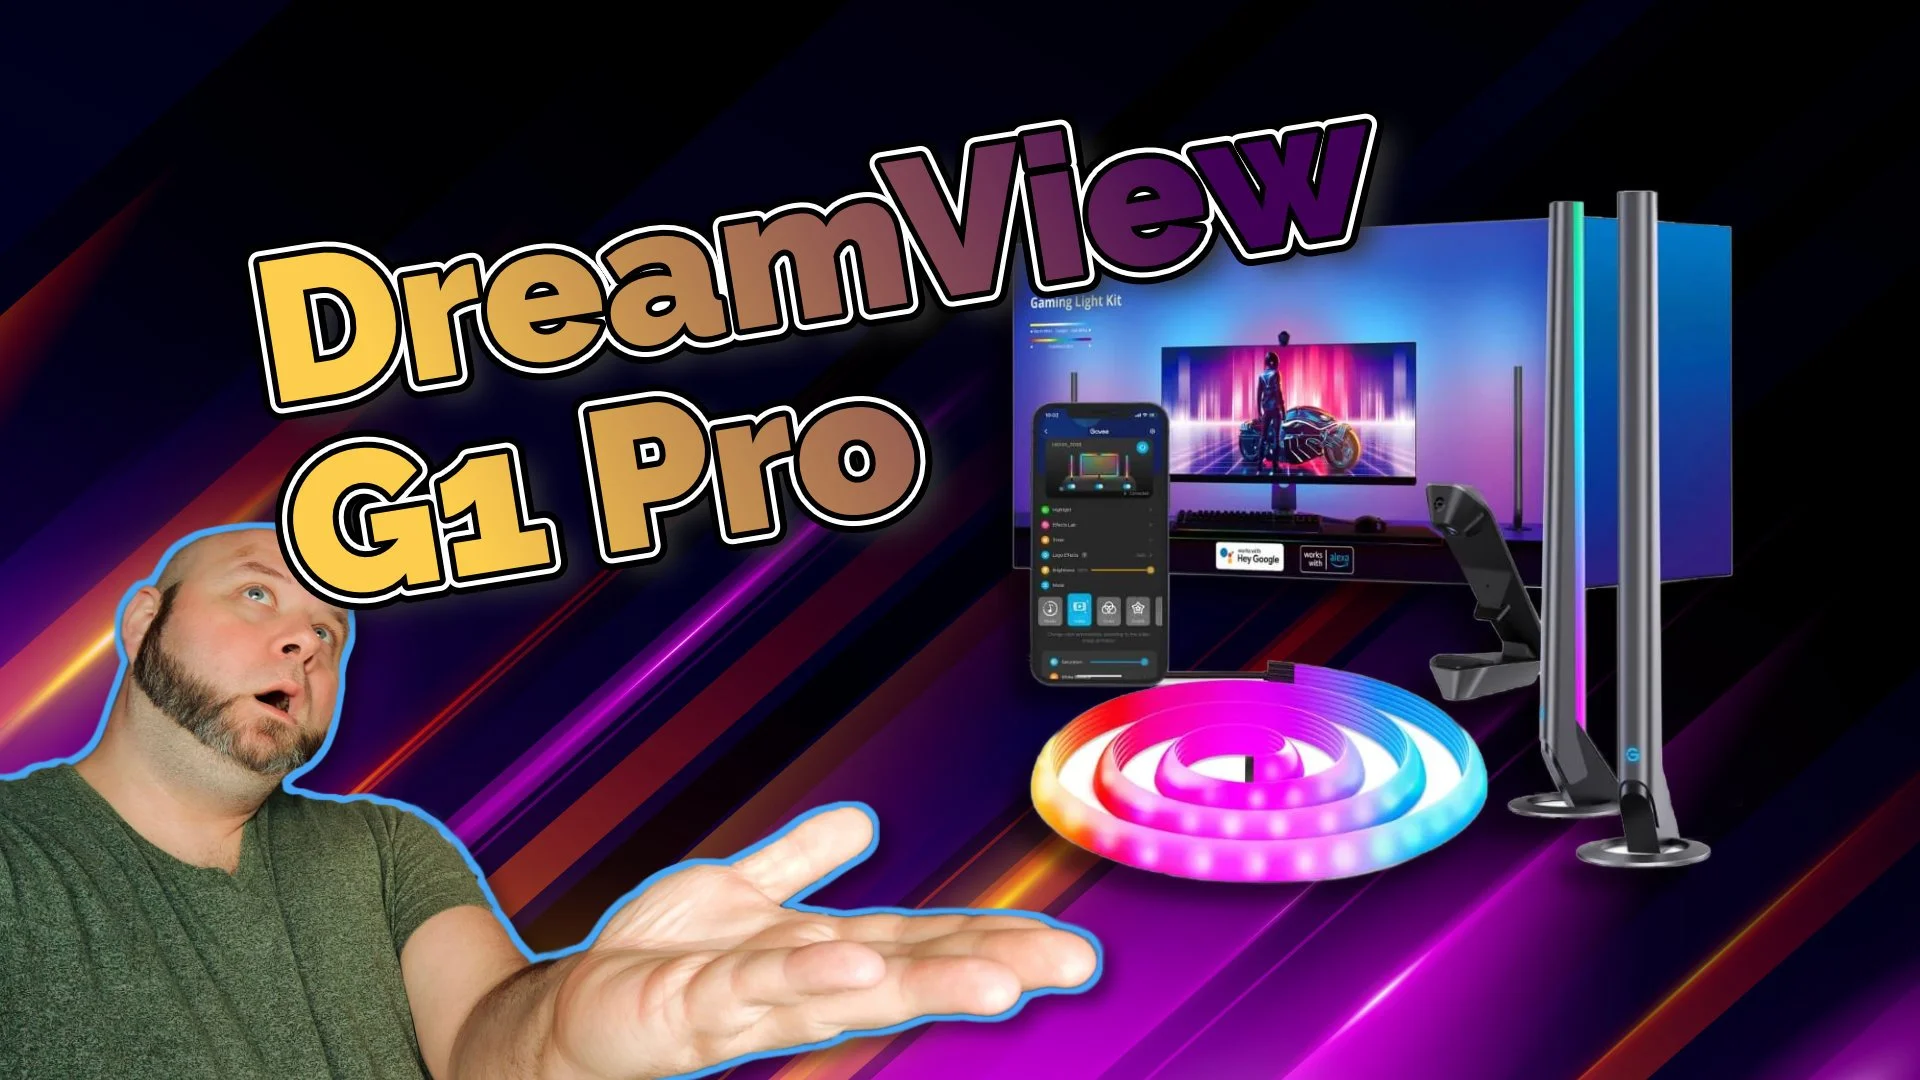 Review Govee DreamView G1 Pro – Makes EPIC Stunning Gaming light